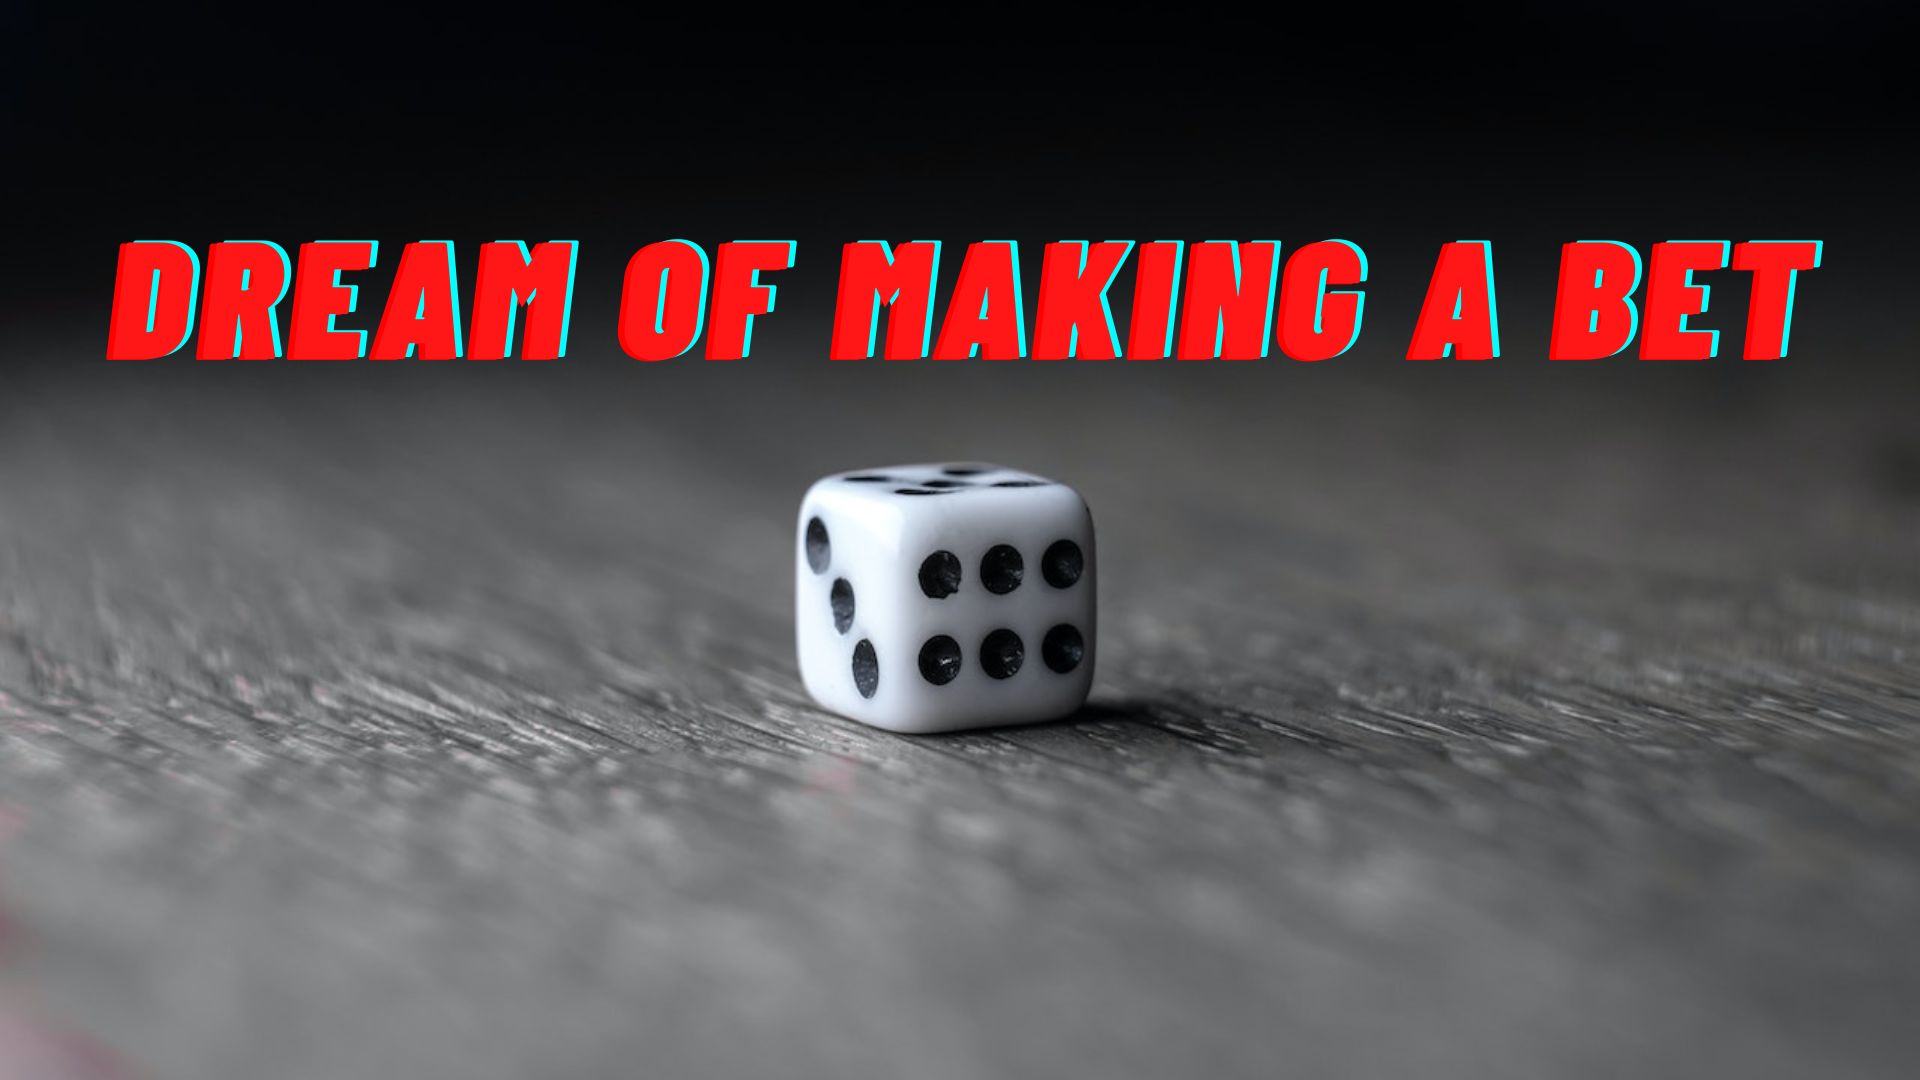 Dream Of Making A Bet - To Take Risks